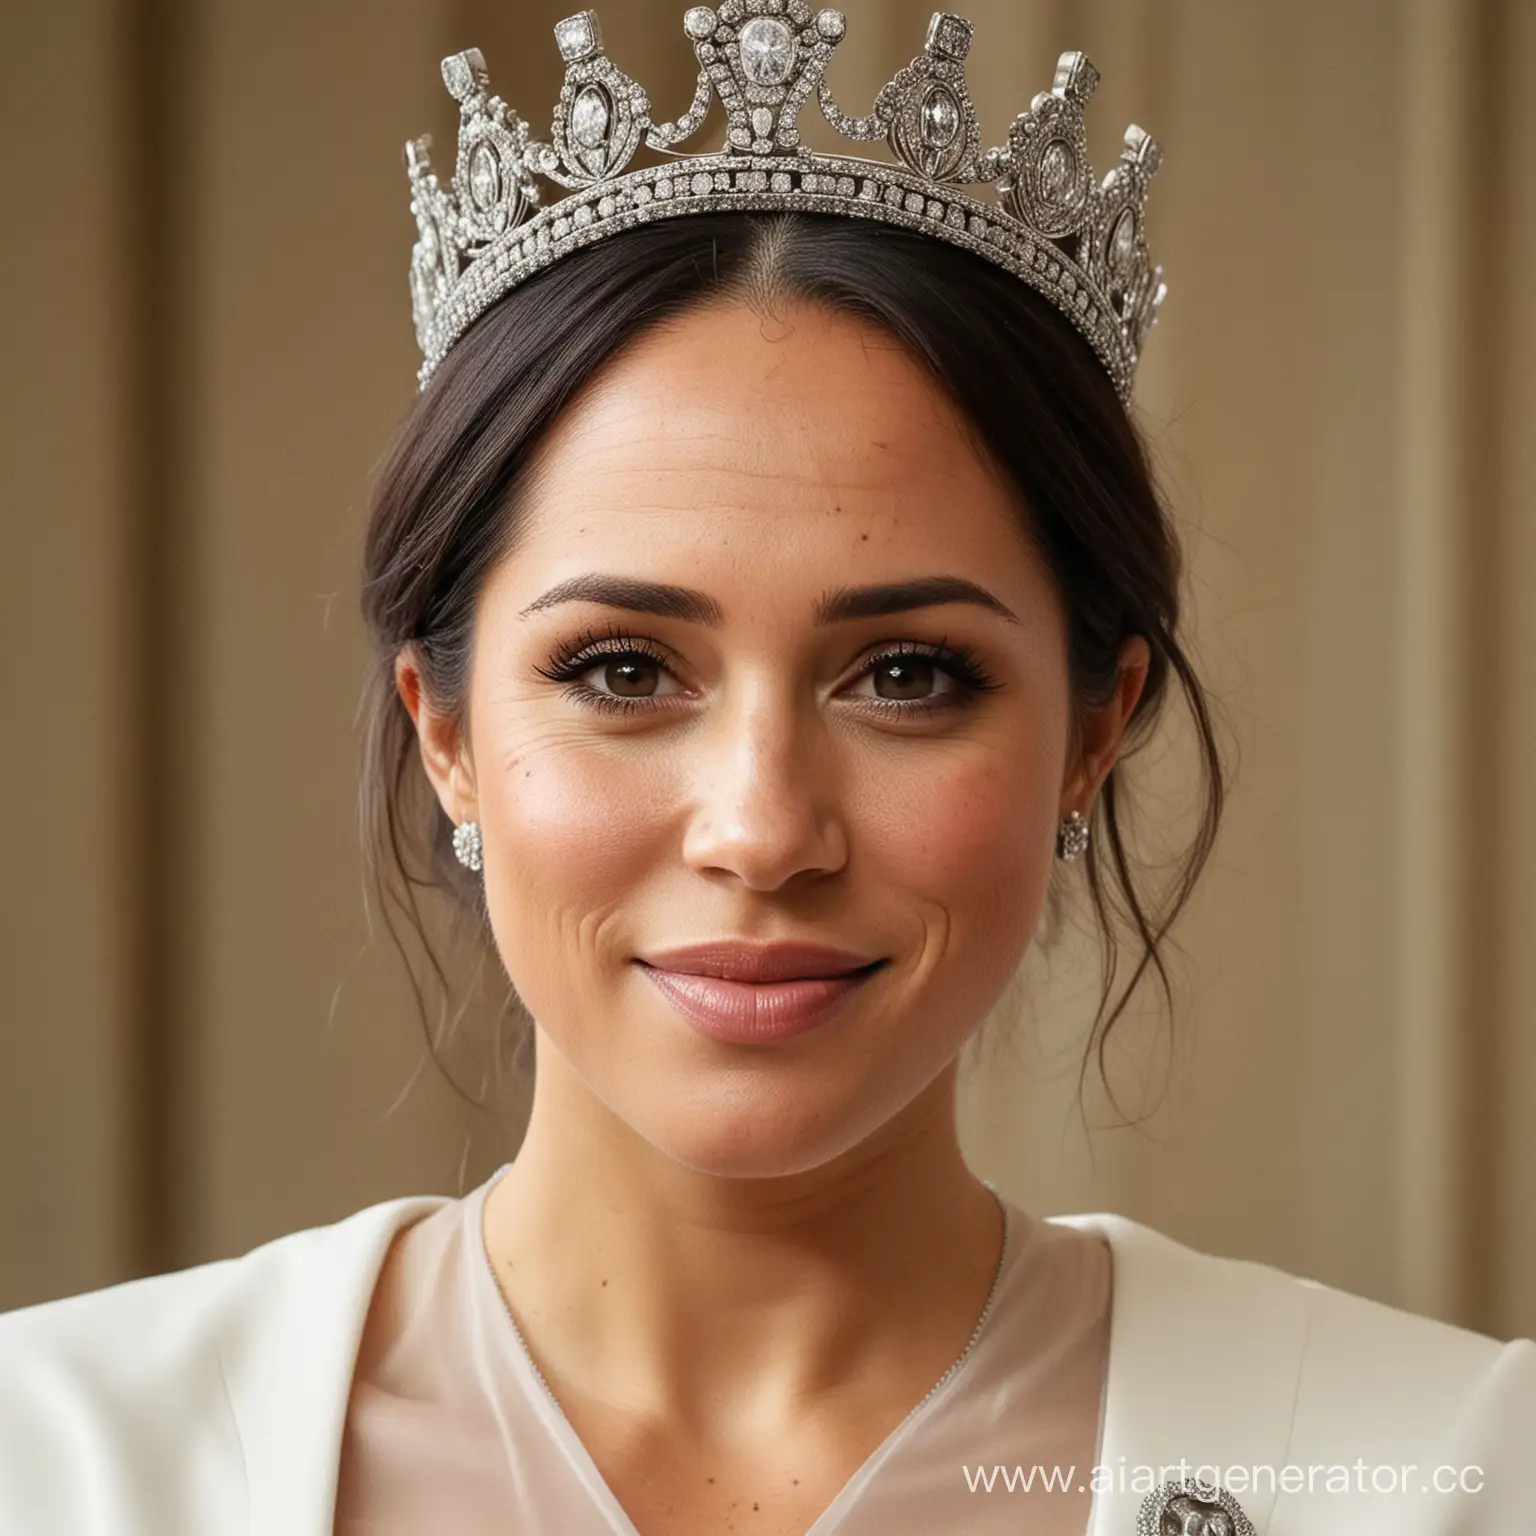 Meghan-Markle-Crowned-Queen-Royalty-and-Success-Portrait